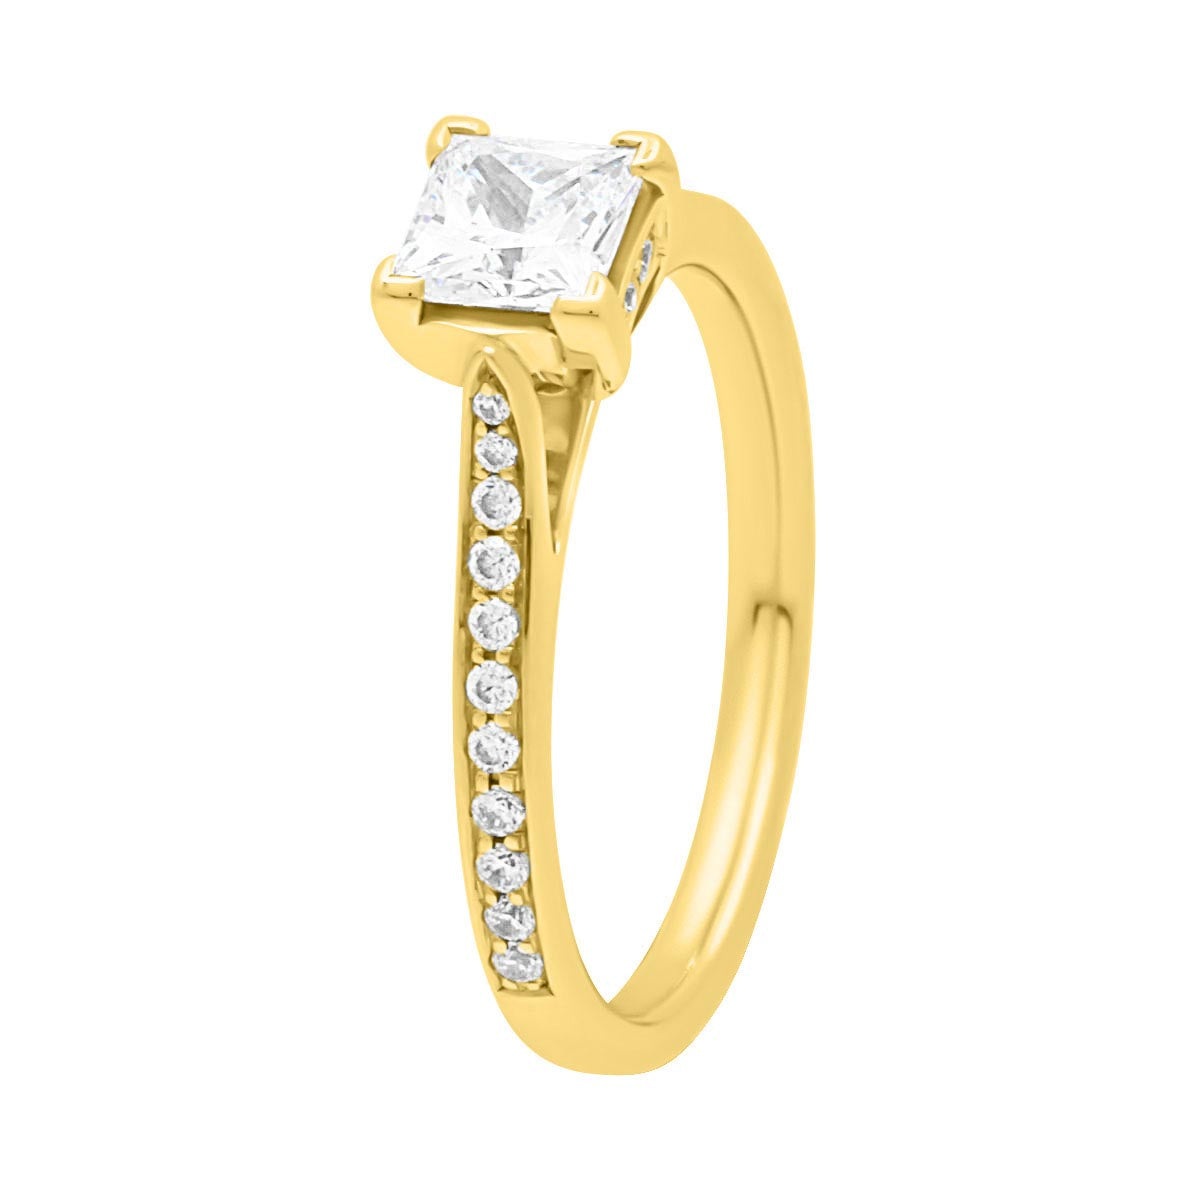 Chevron Claw Engagement Ring  made of yellow gold in an angled position